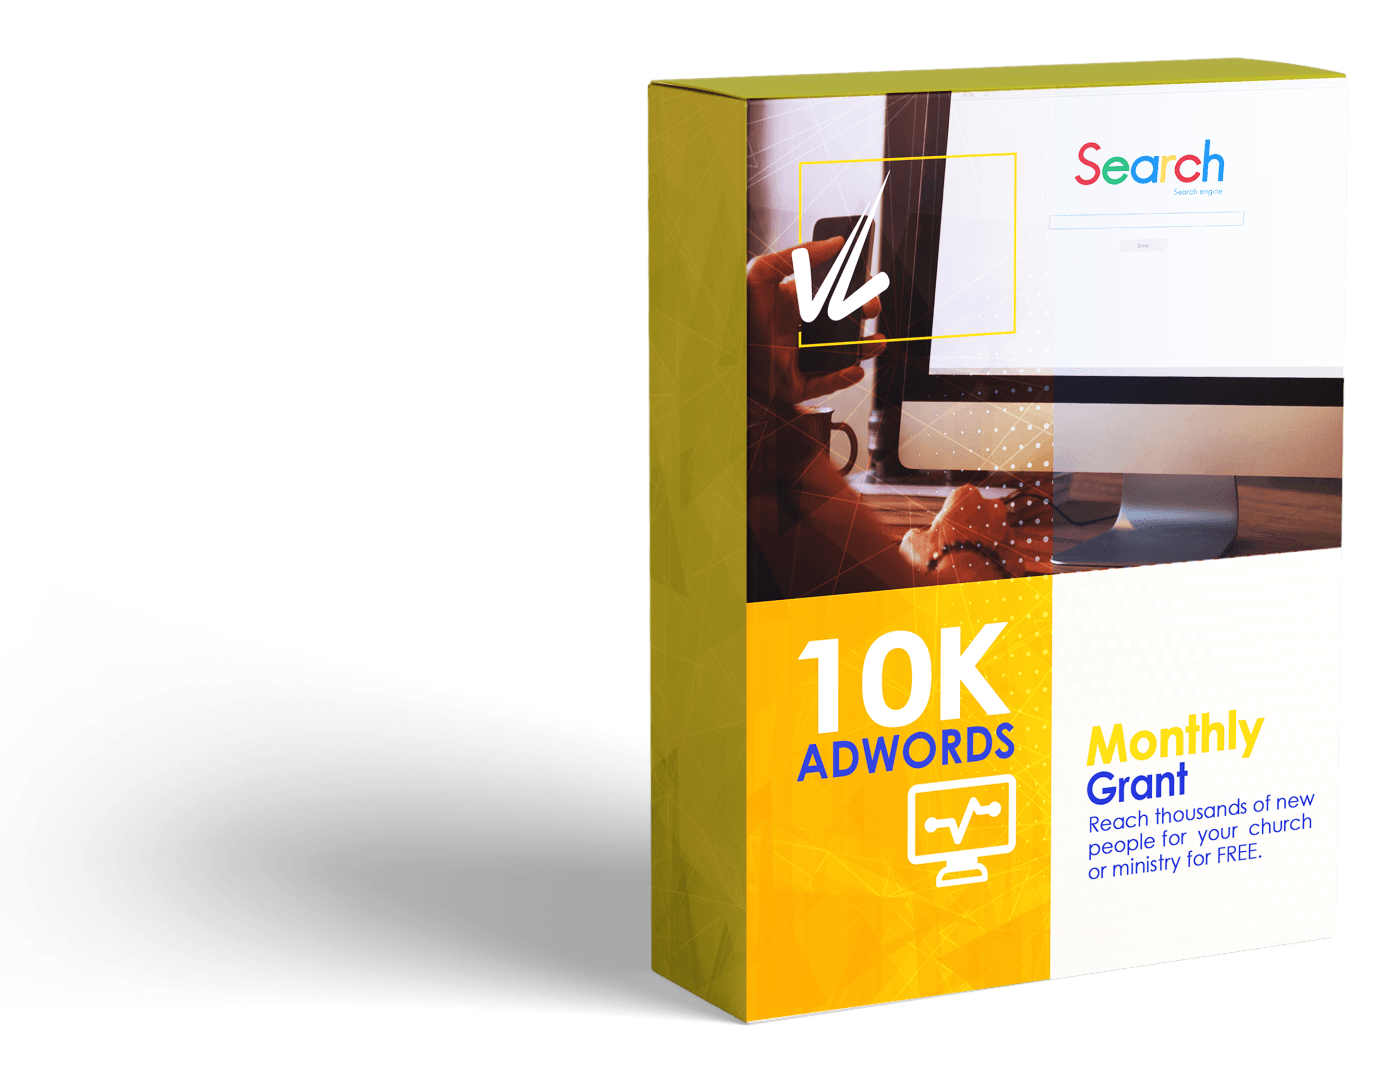 10K ADWORDS - Get a US$10,000/mo Google Grant  to spend in Google Adwords!